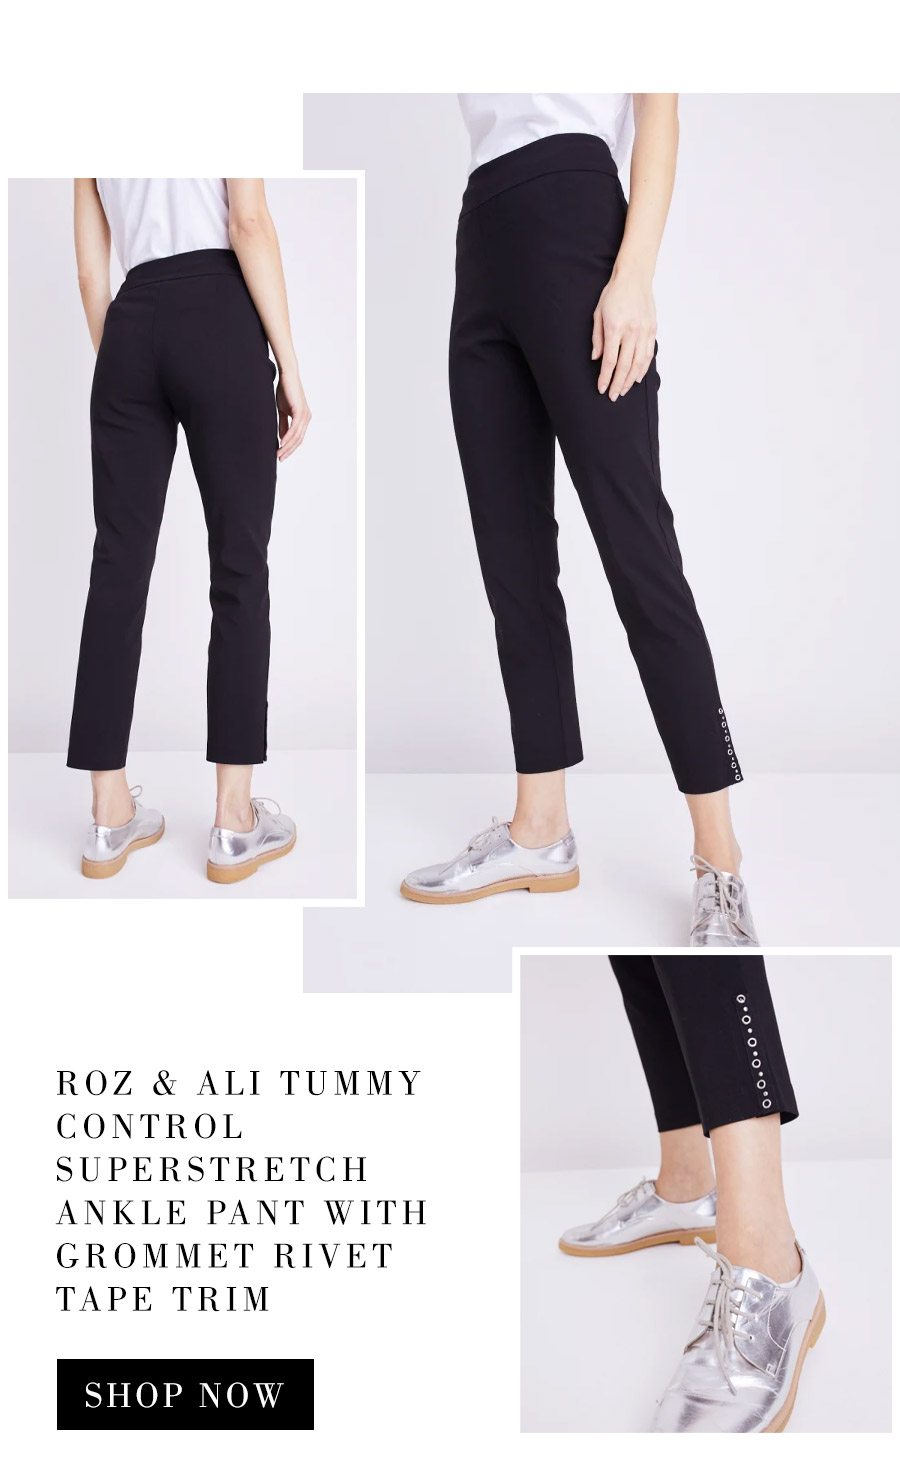 ROZ & ALI TUMMY CONTROL SUPERSTRETCH ANKLE PANT WITH GROMMET RIVET TAPE TRIM